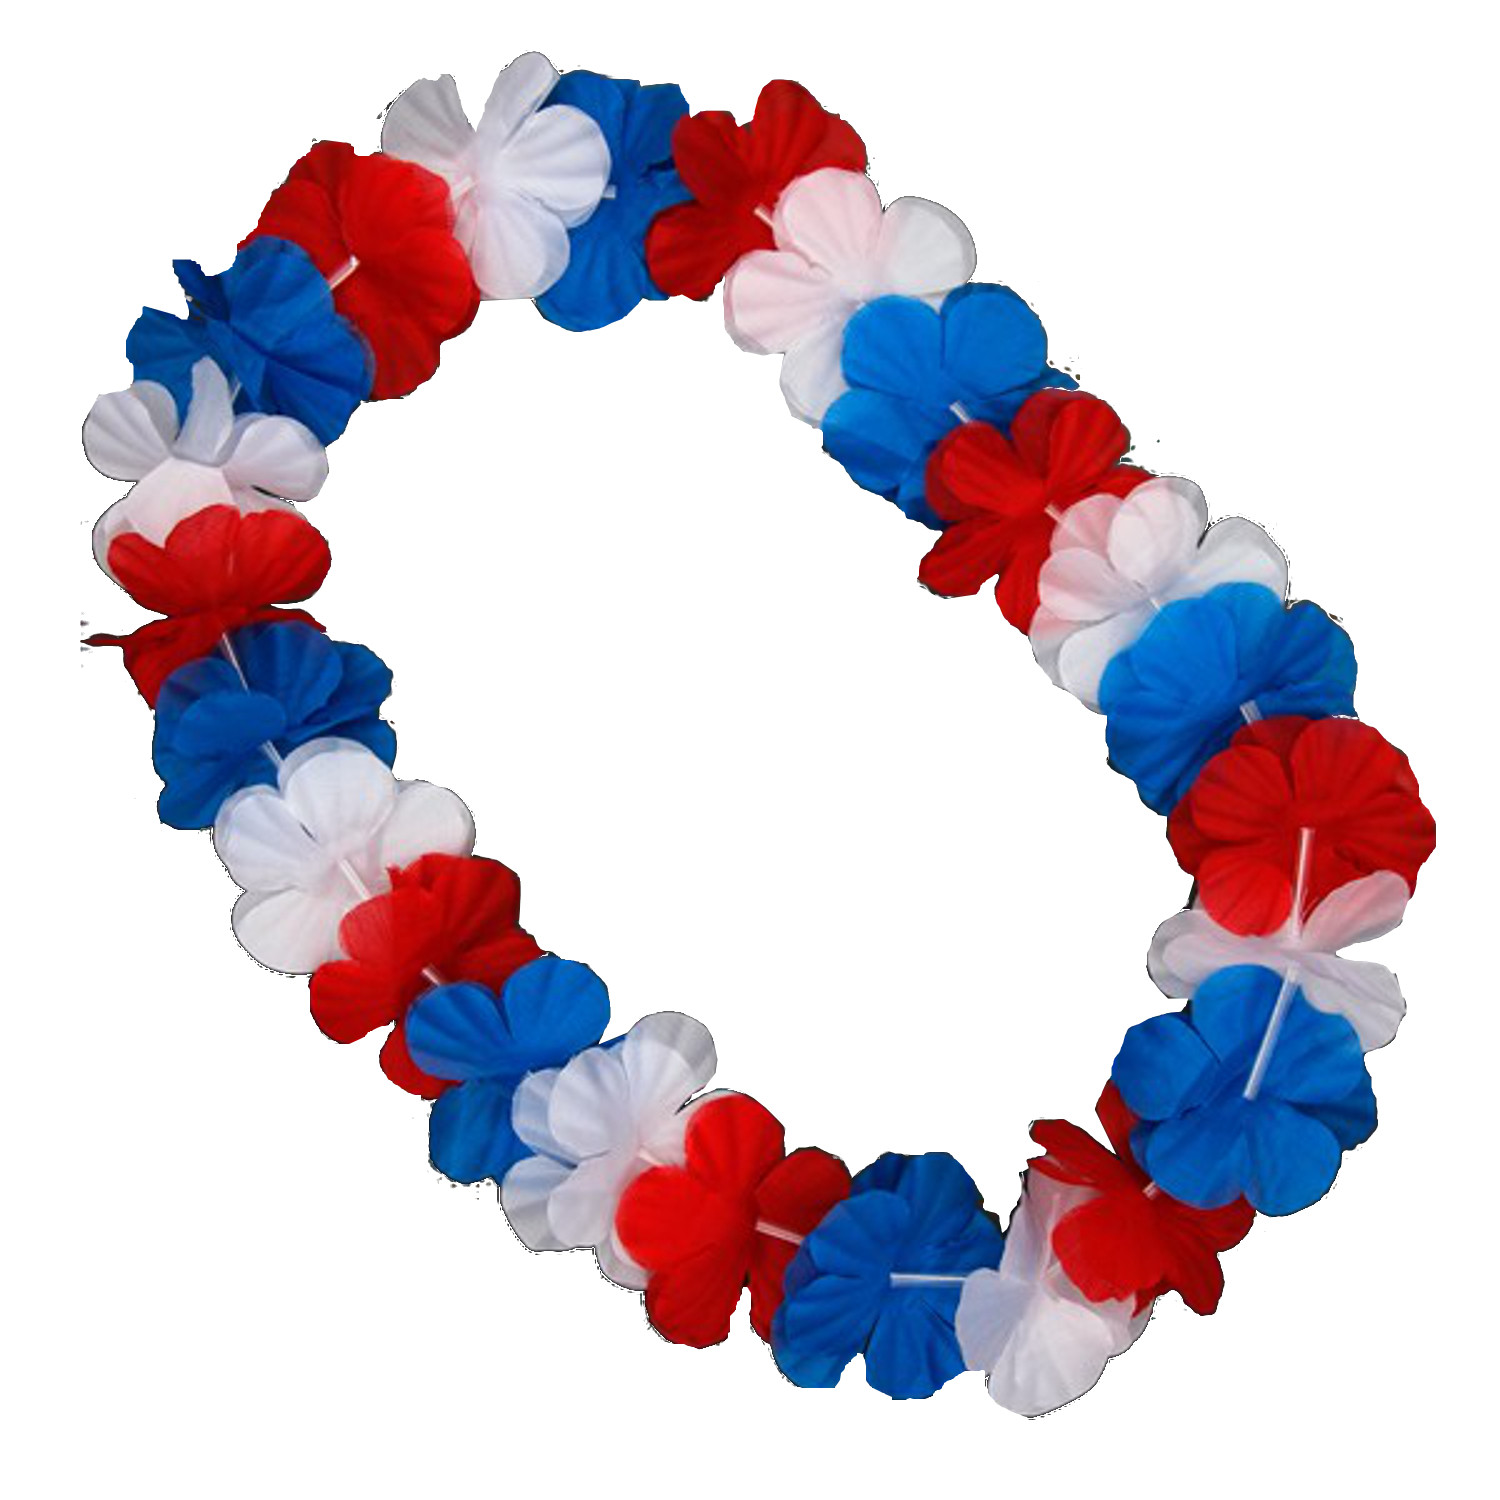 Flower Necklace Hawaii
 Hawaiian Flower Lei Necklace Red White and Blue • Magic